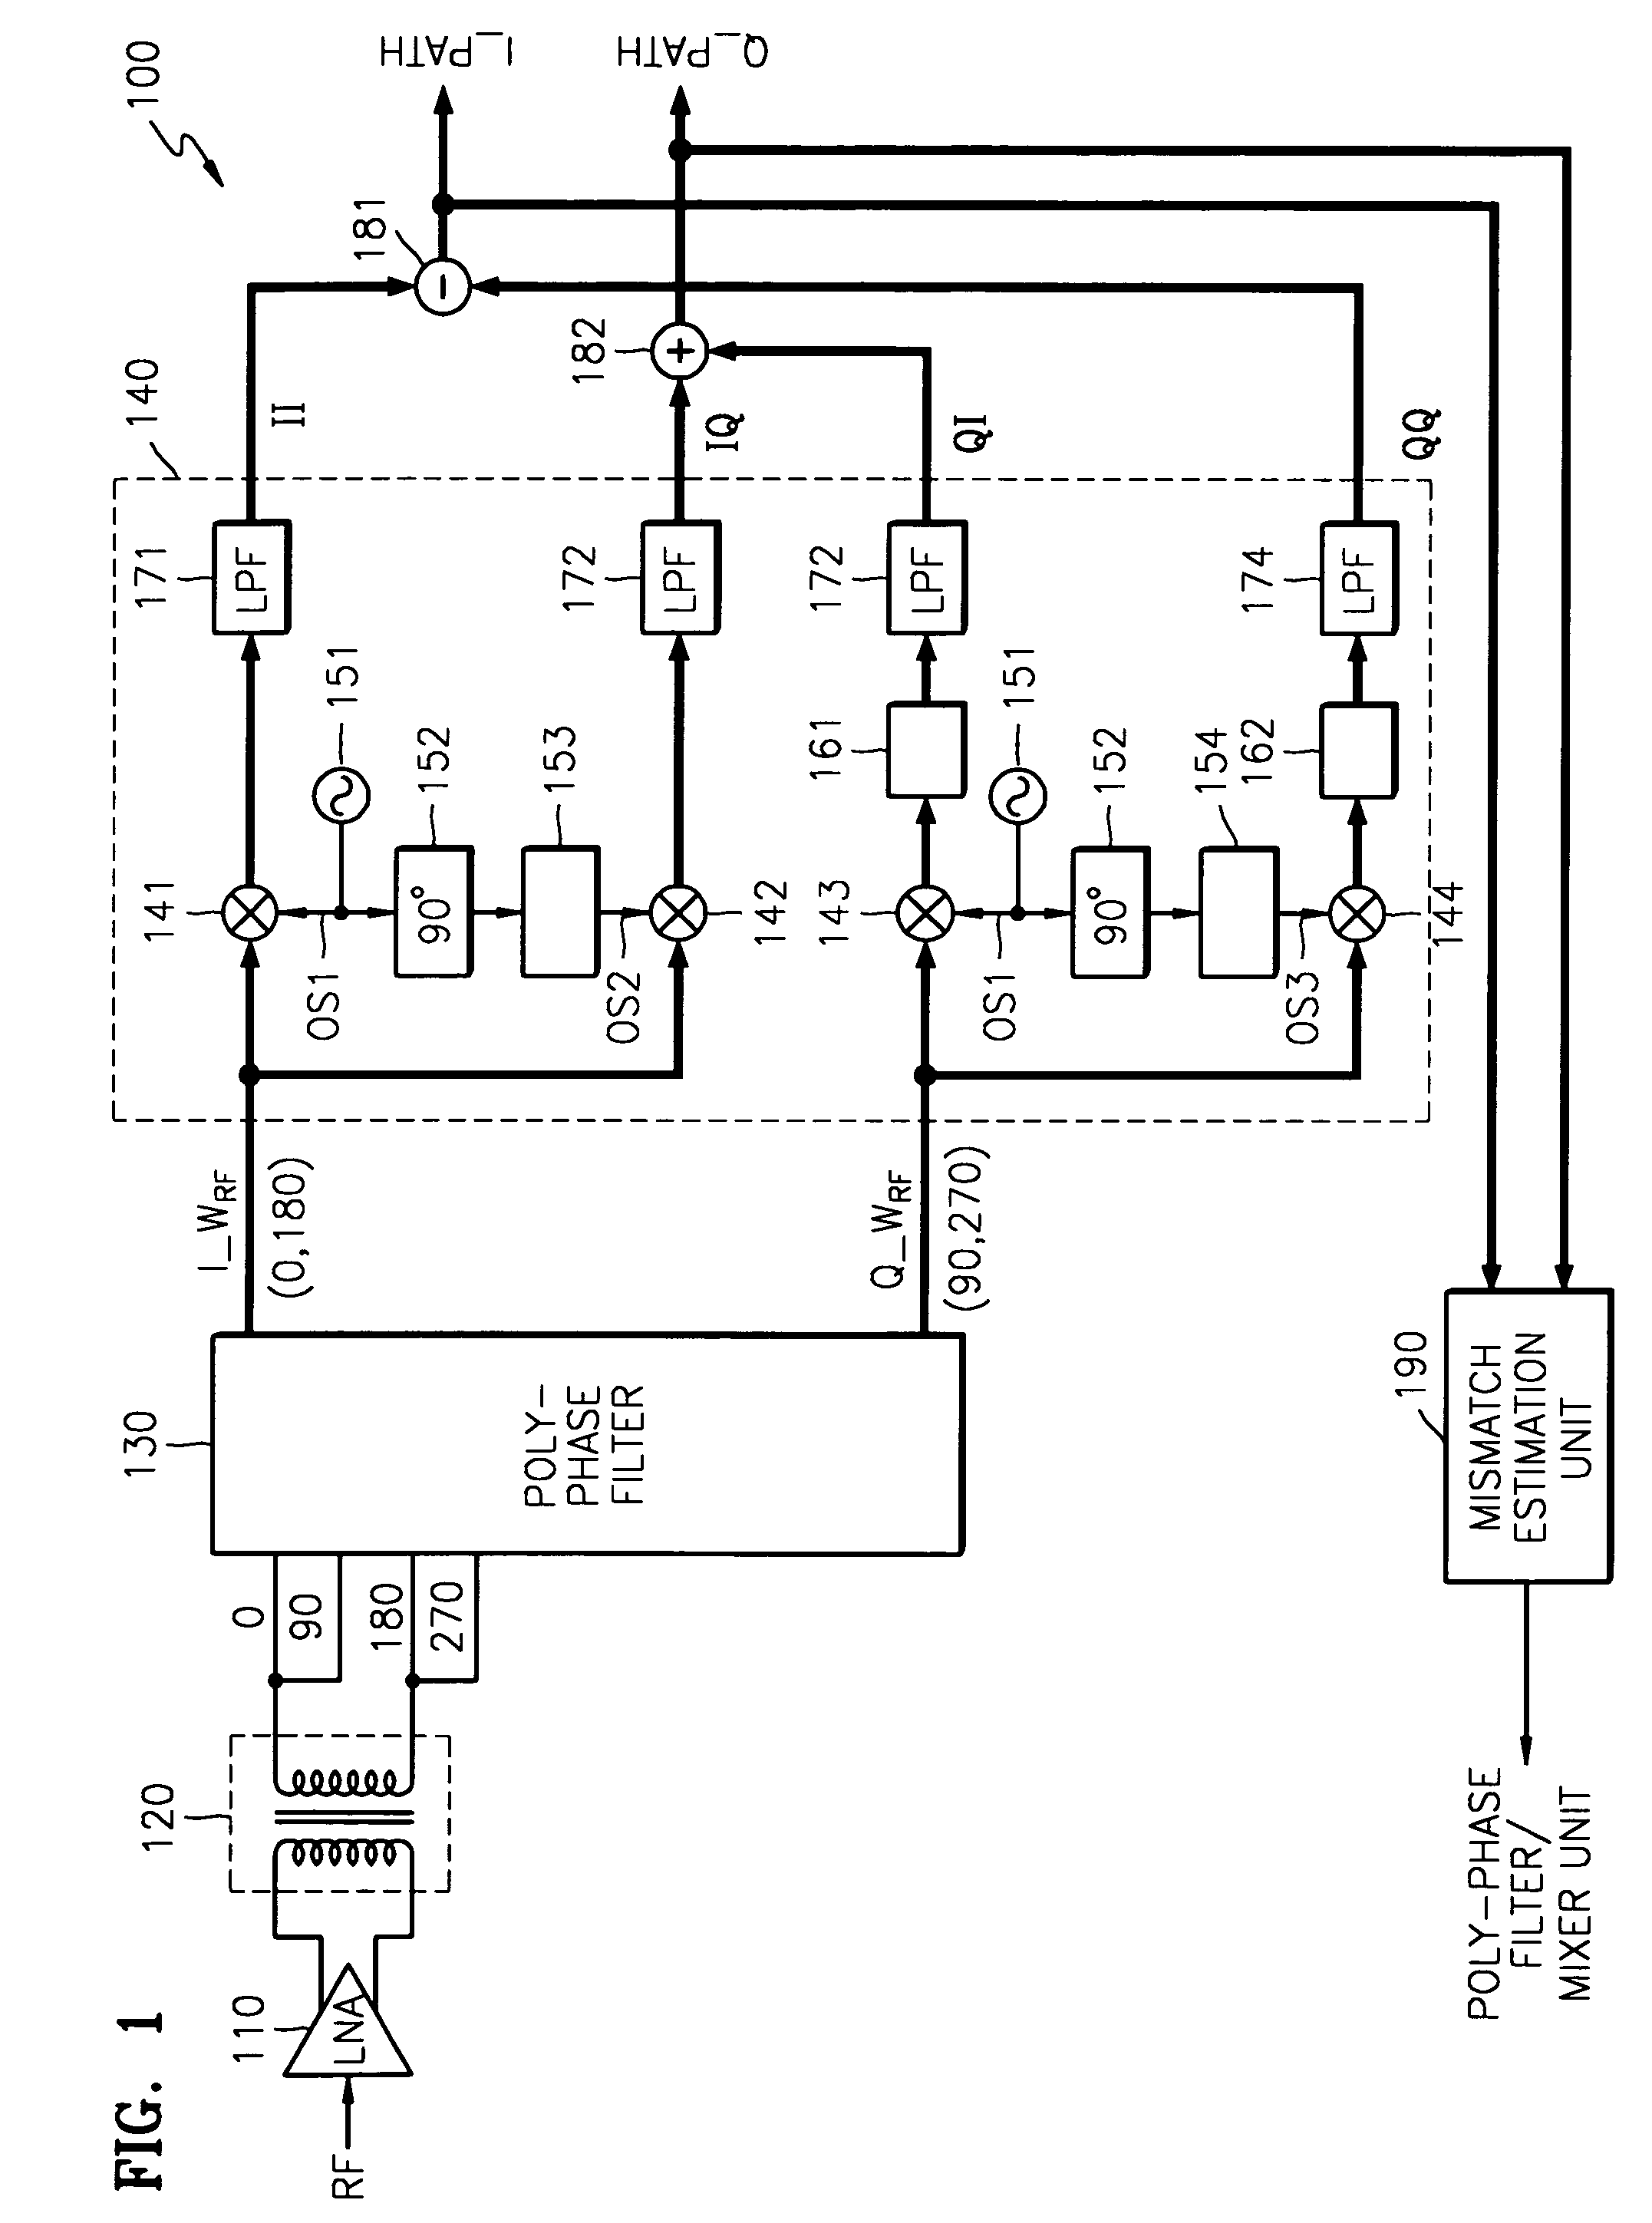 Direct conversion receiver for calibrating phase and gain mismatch